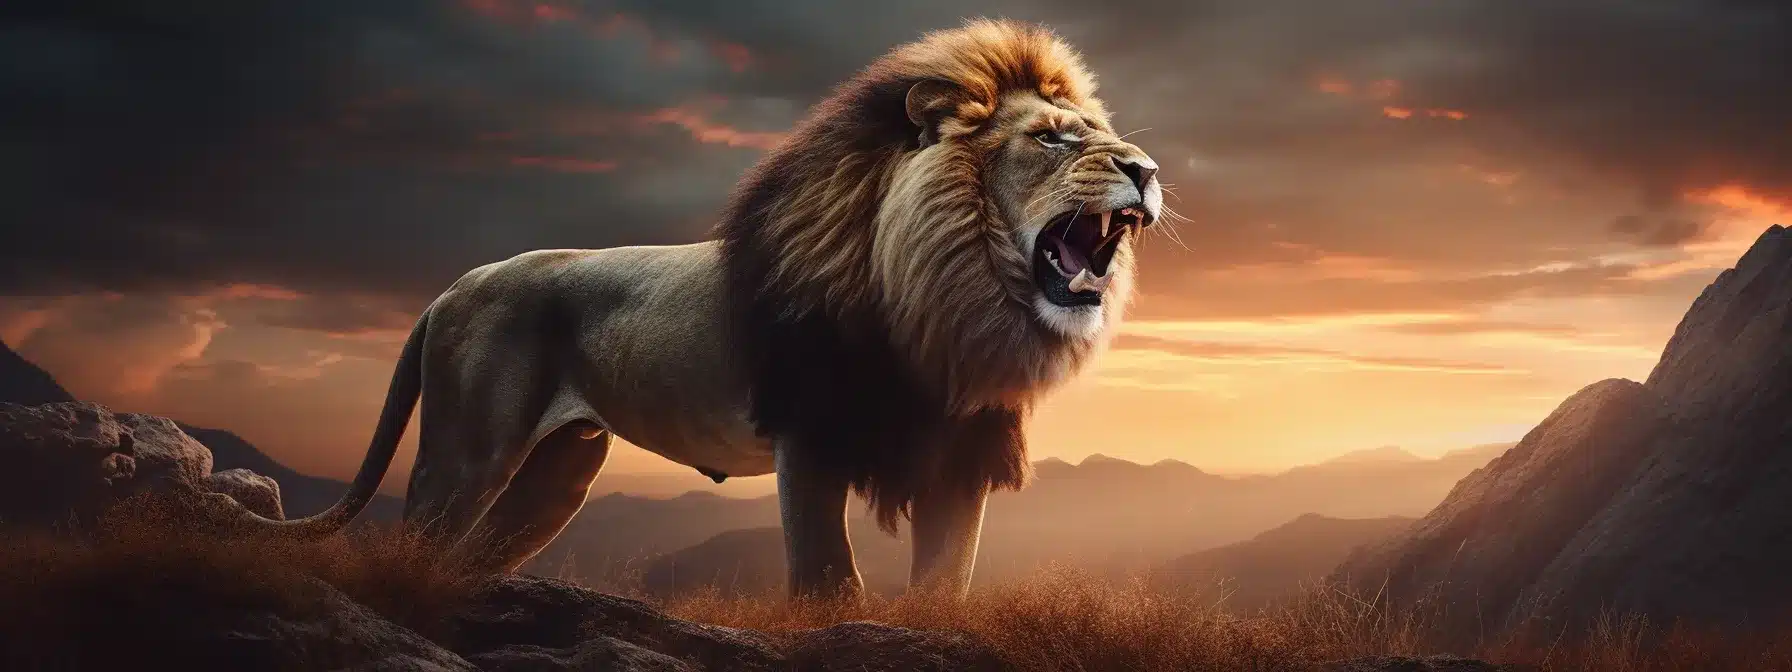 A Captivating Digital Landscape Showing A Roaring Lion Standing Tall In Search Engine Results, Demanding Attention.